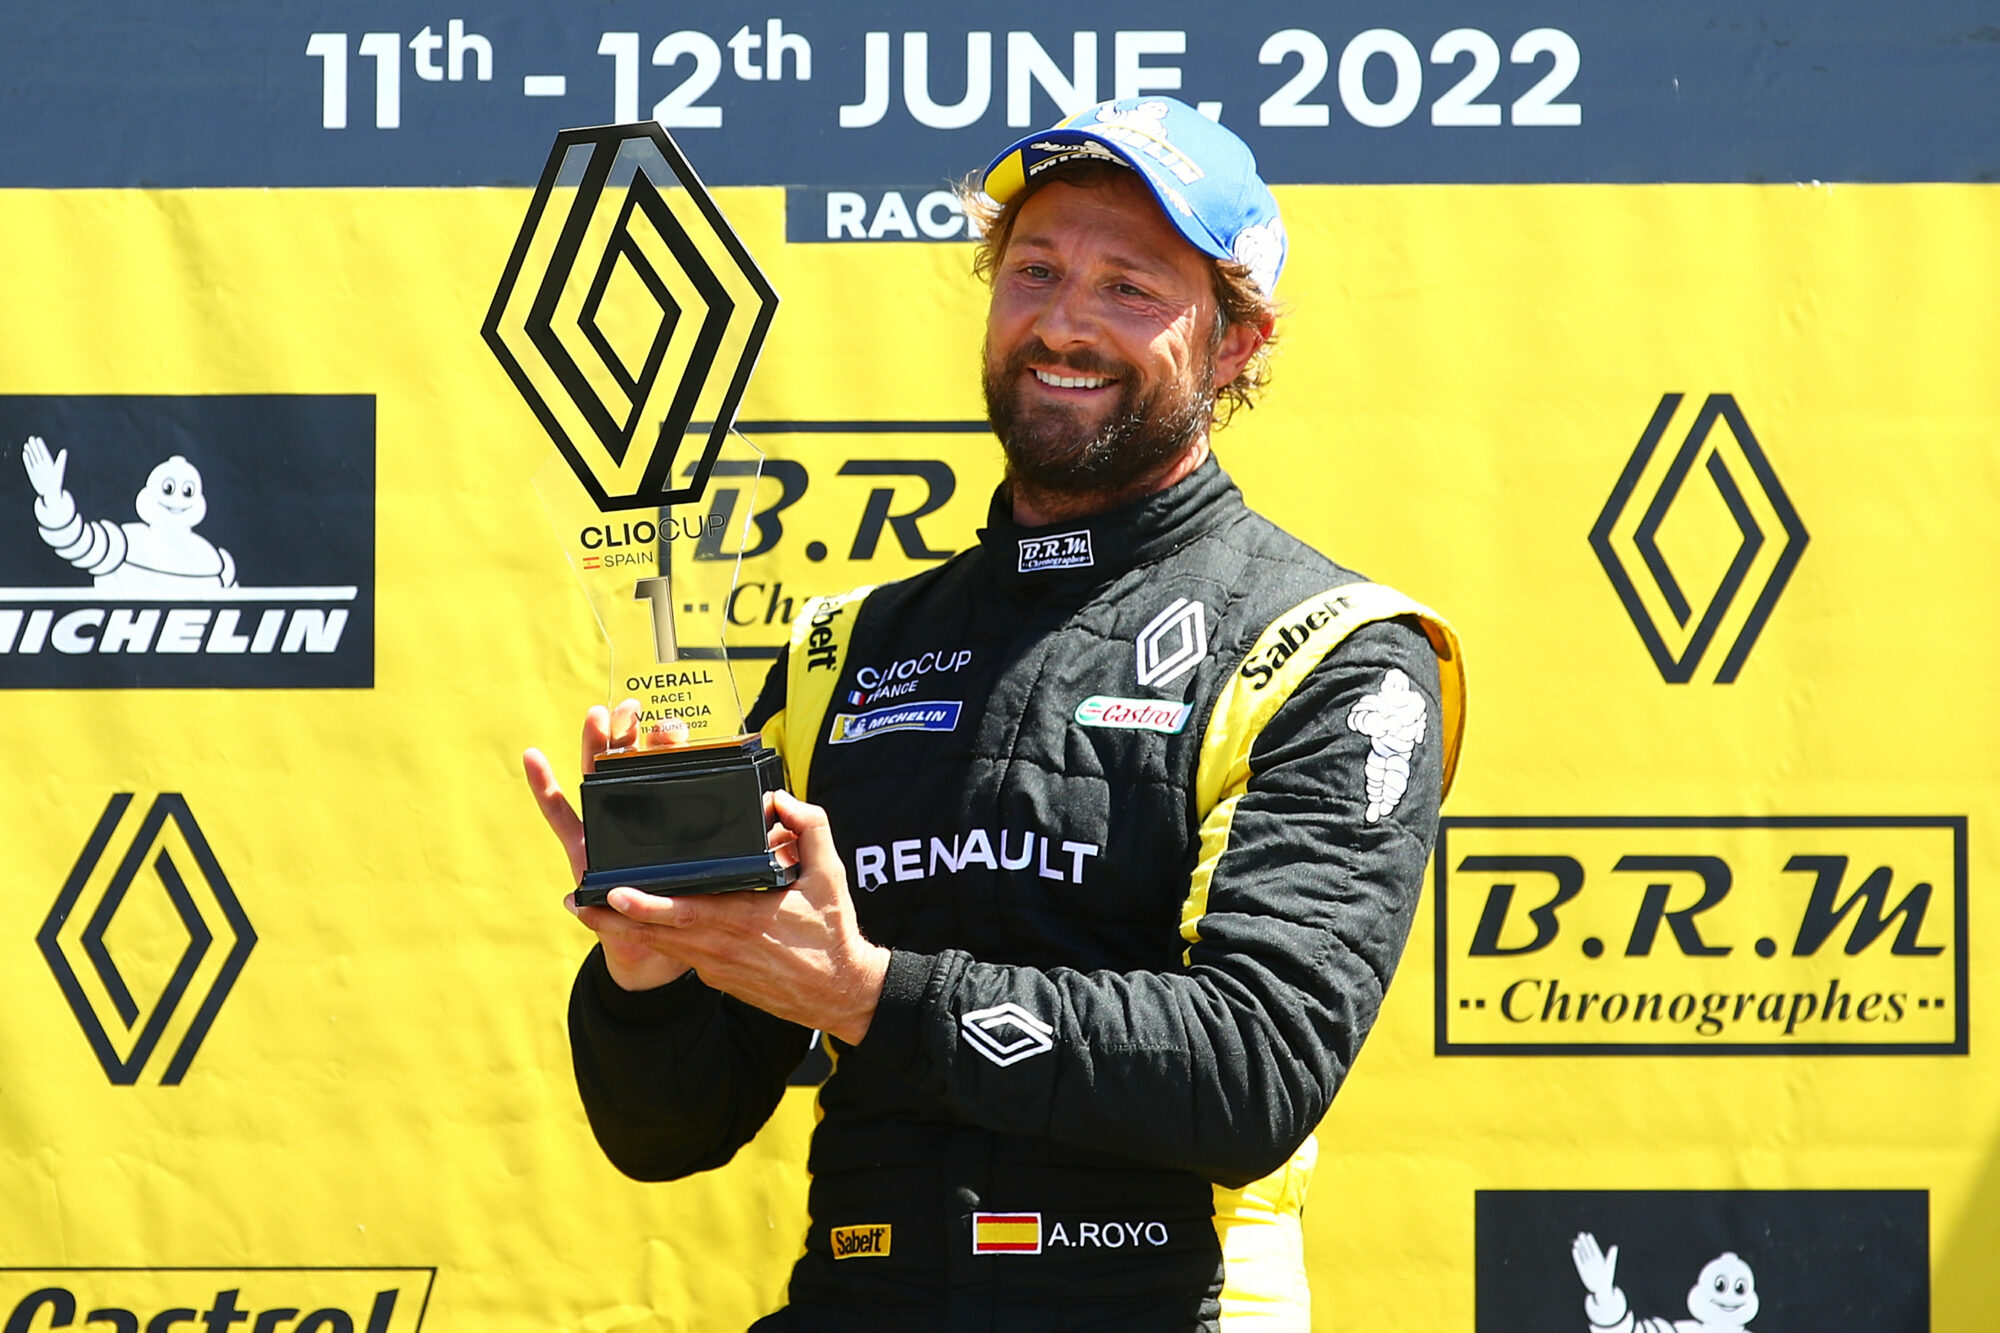 2-2022 - Royo and Abella share the victories at Valencia